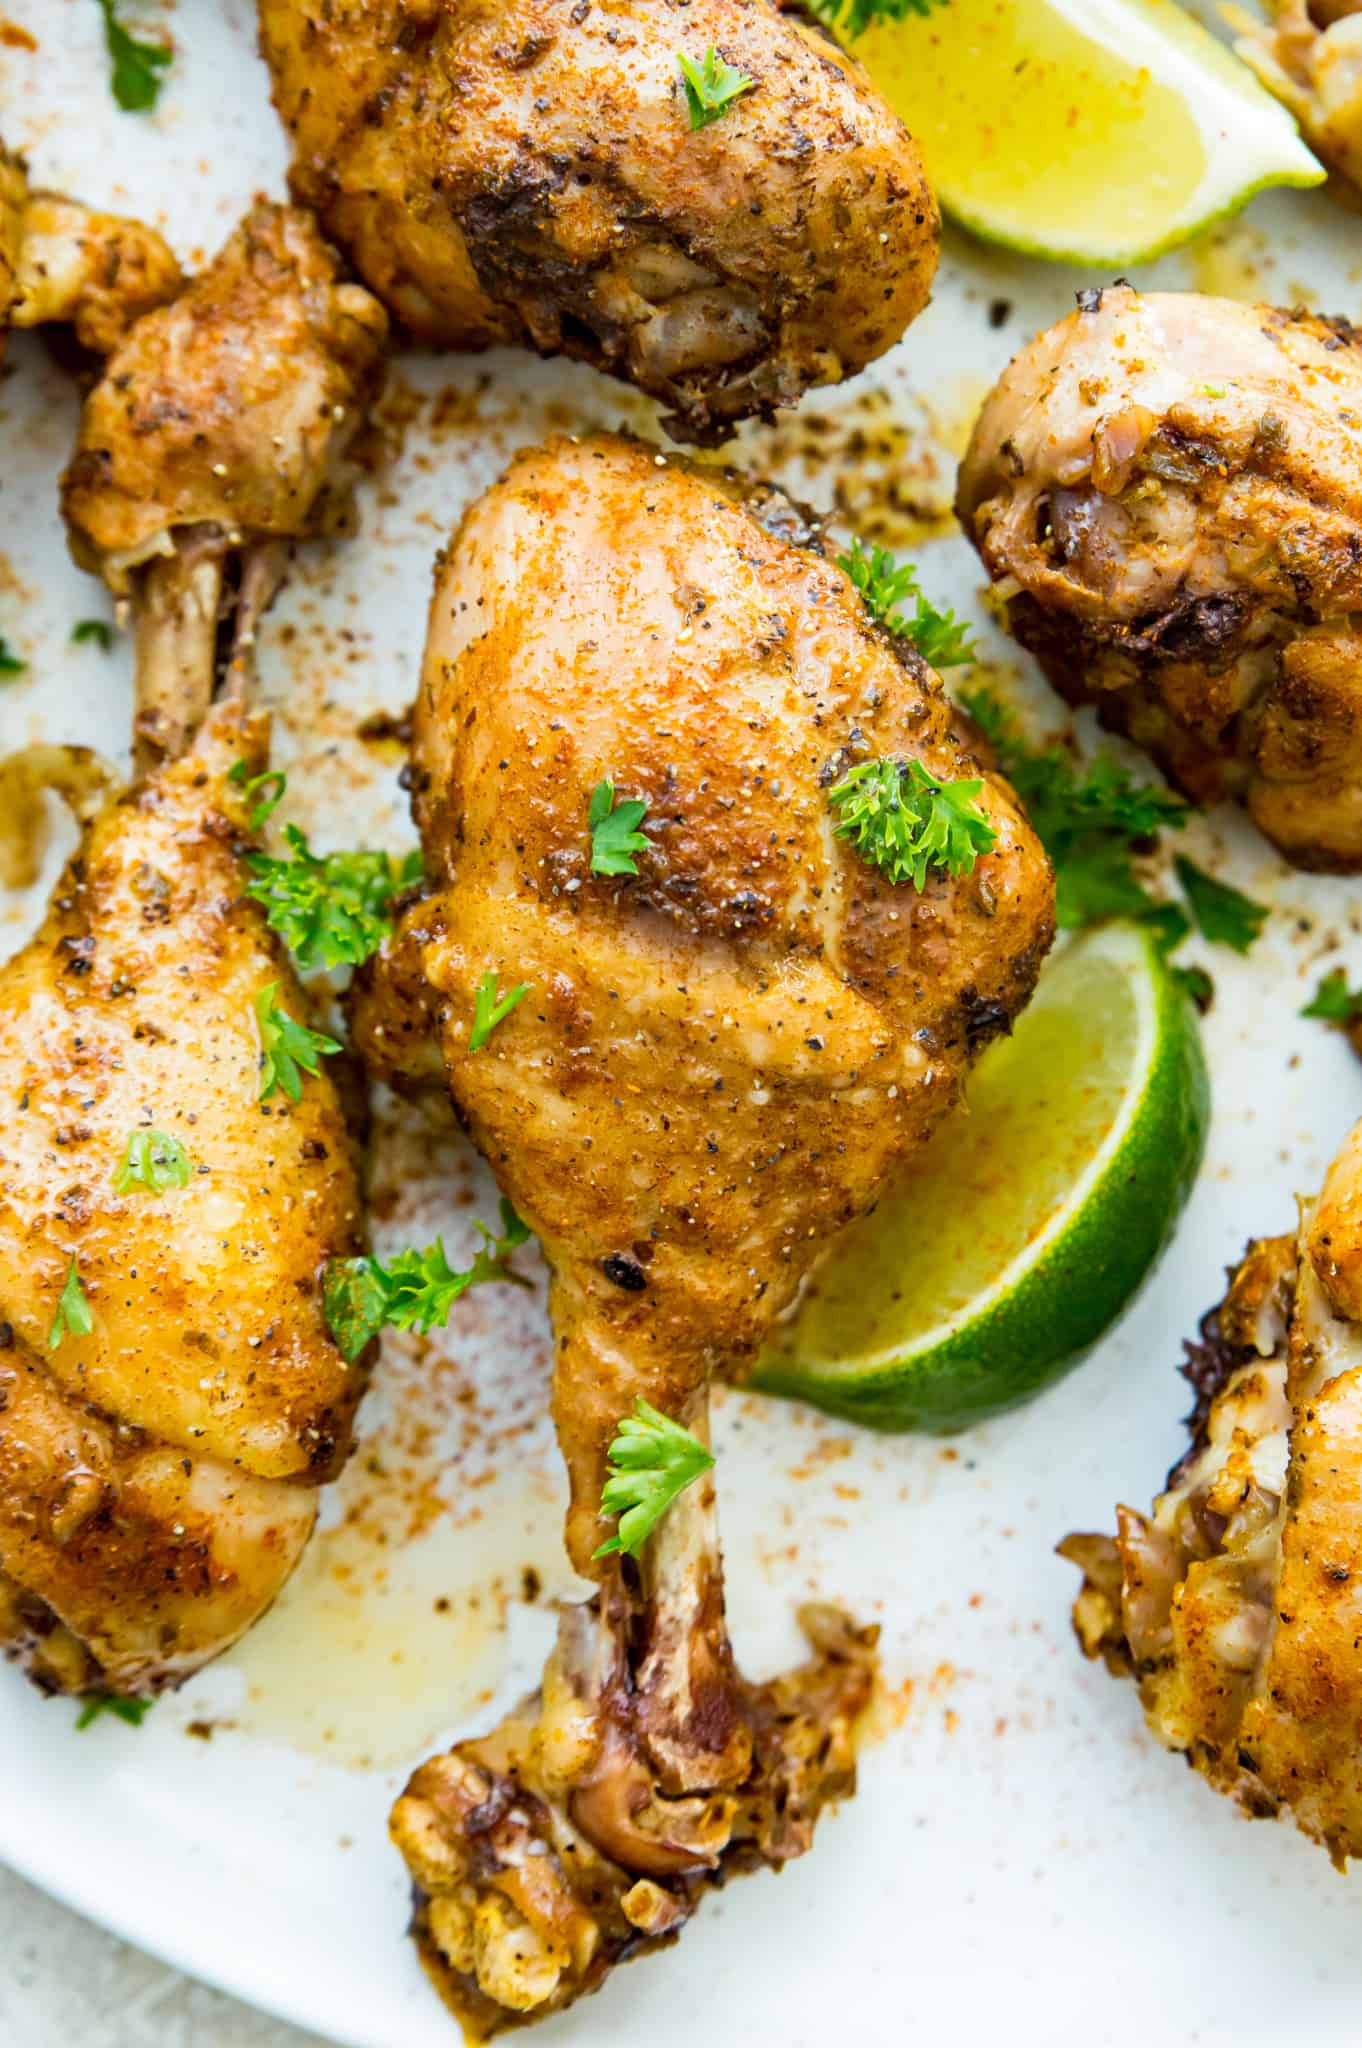 A plate of chicken drumsticks that were cooked in an Instant pot garnished with cilantro.